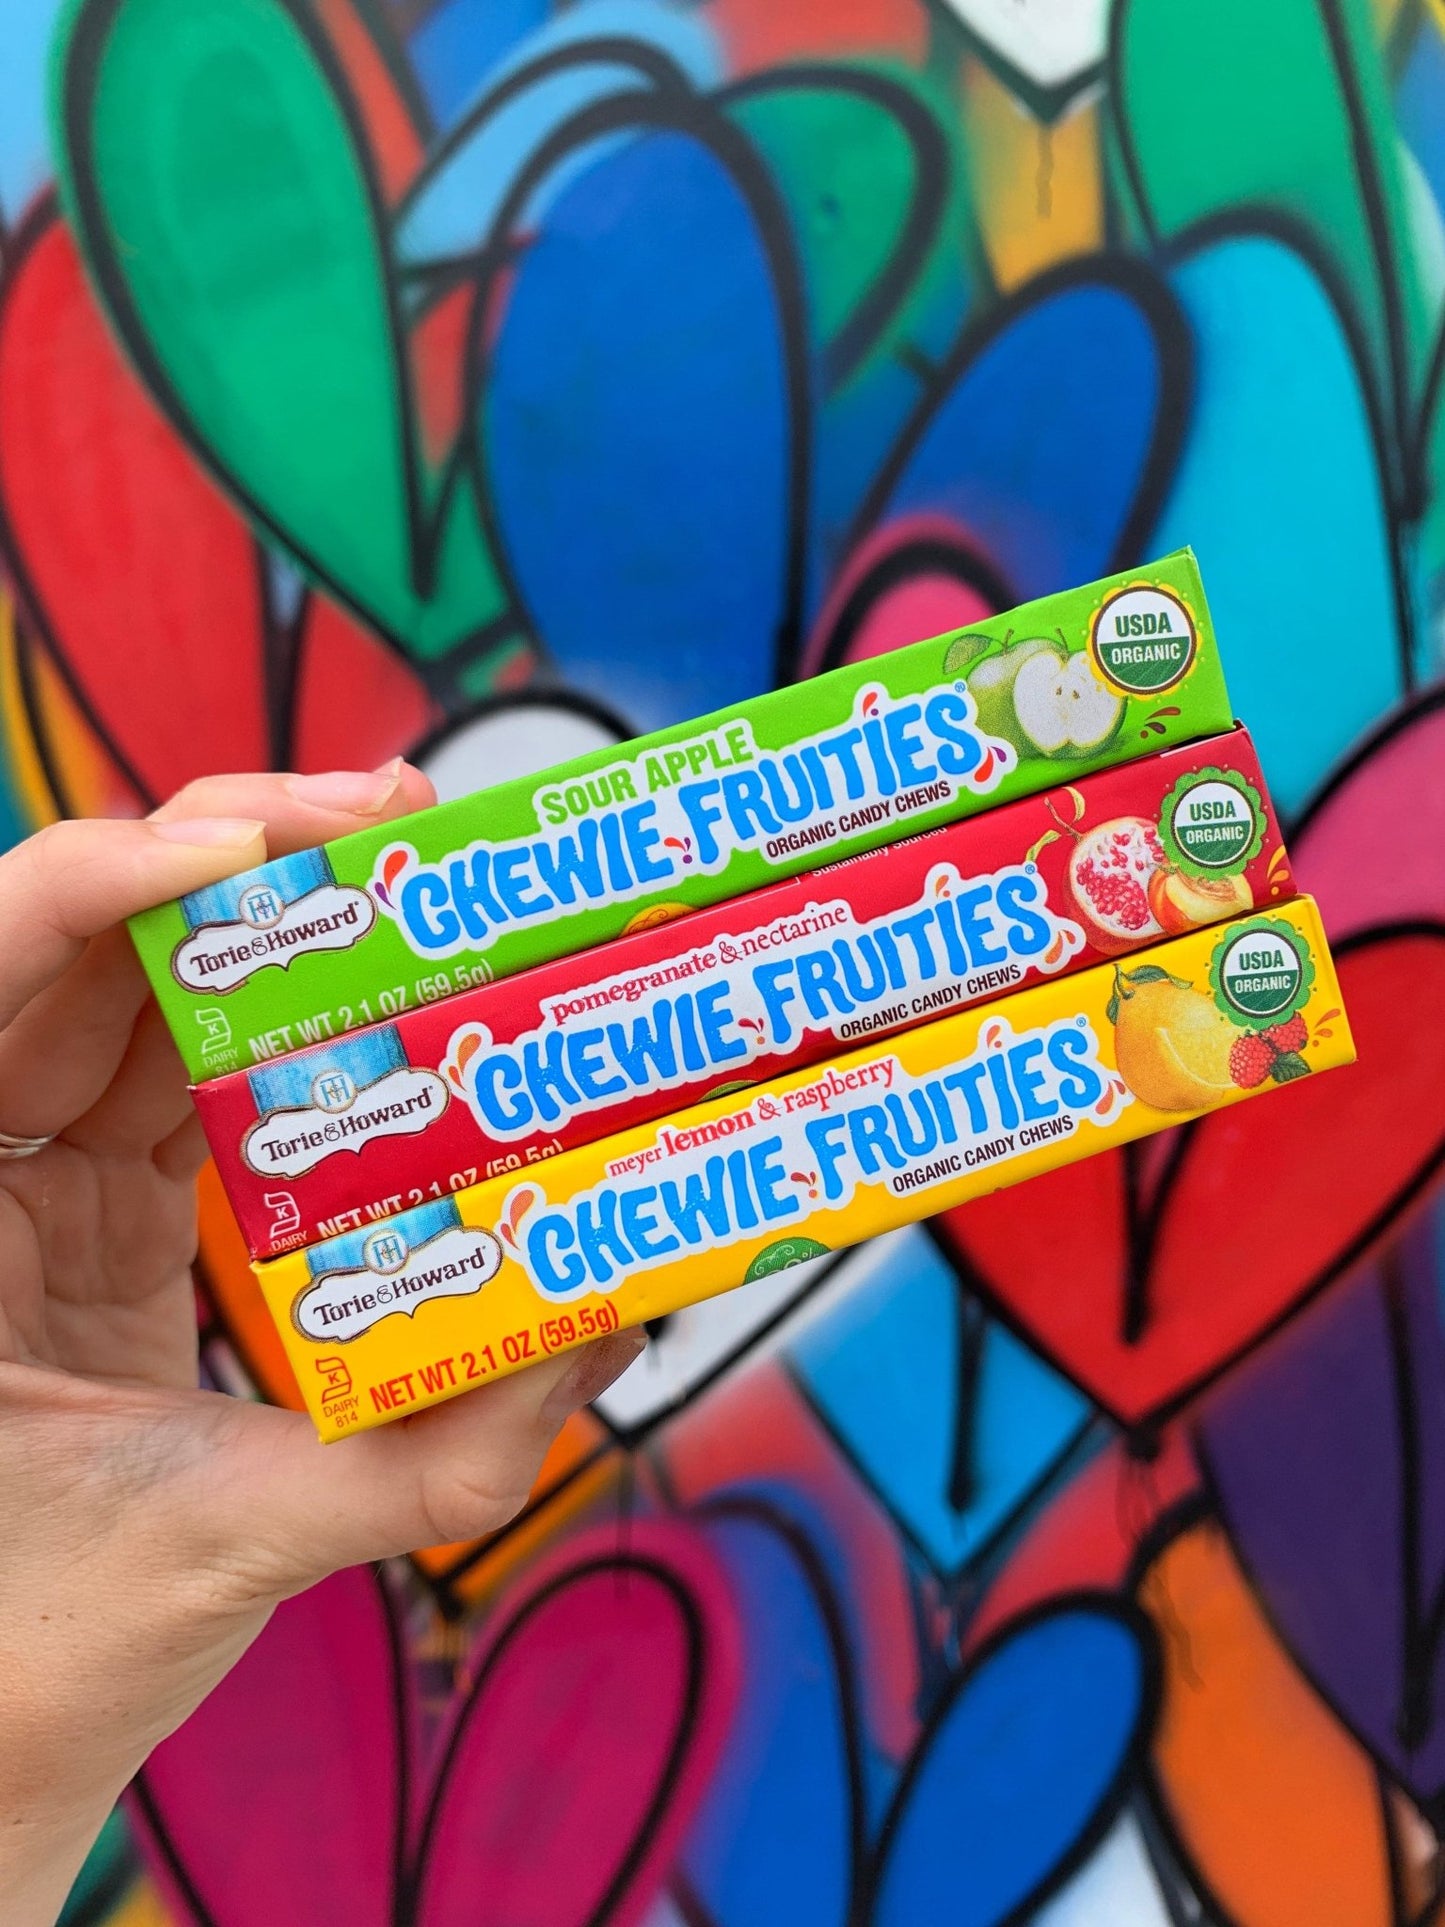 Torie & Howard Chewie Fruities Sour Apple, Pomegranate & Nectarine, and Meyer Lemon & Raspberry Stick Packs with heart graffiti background